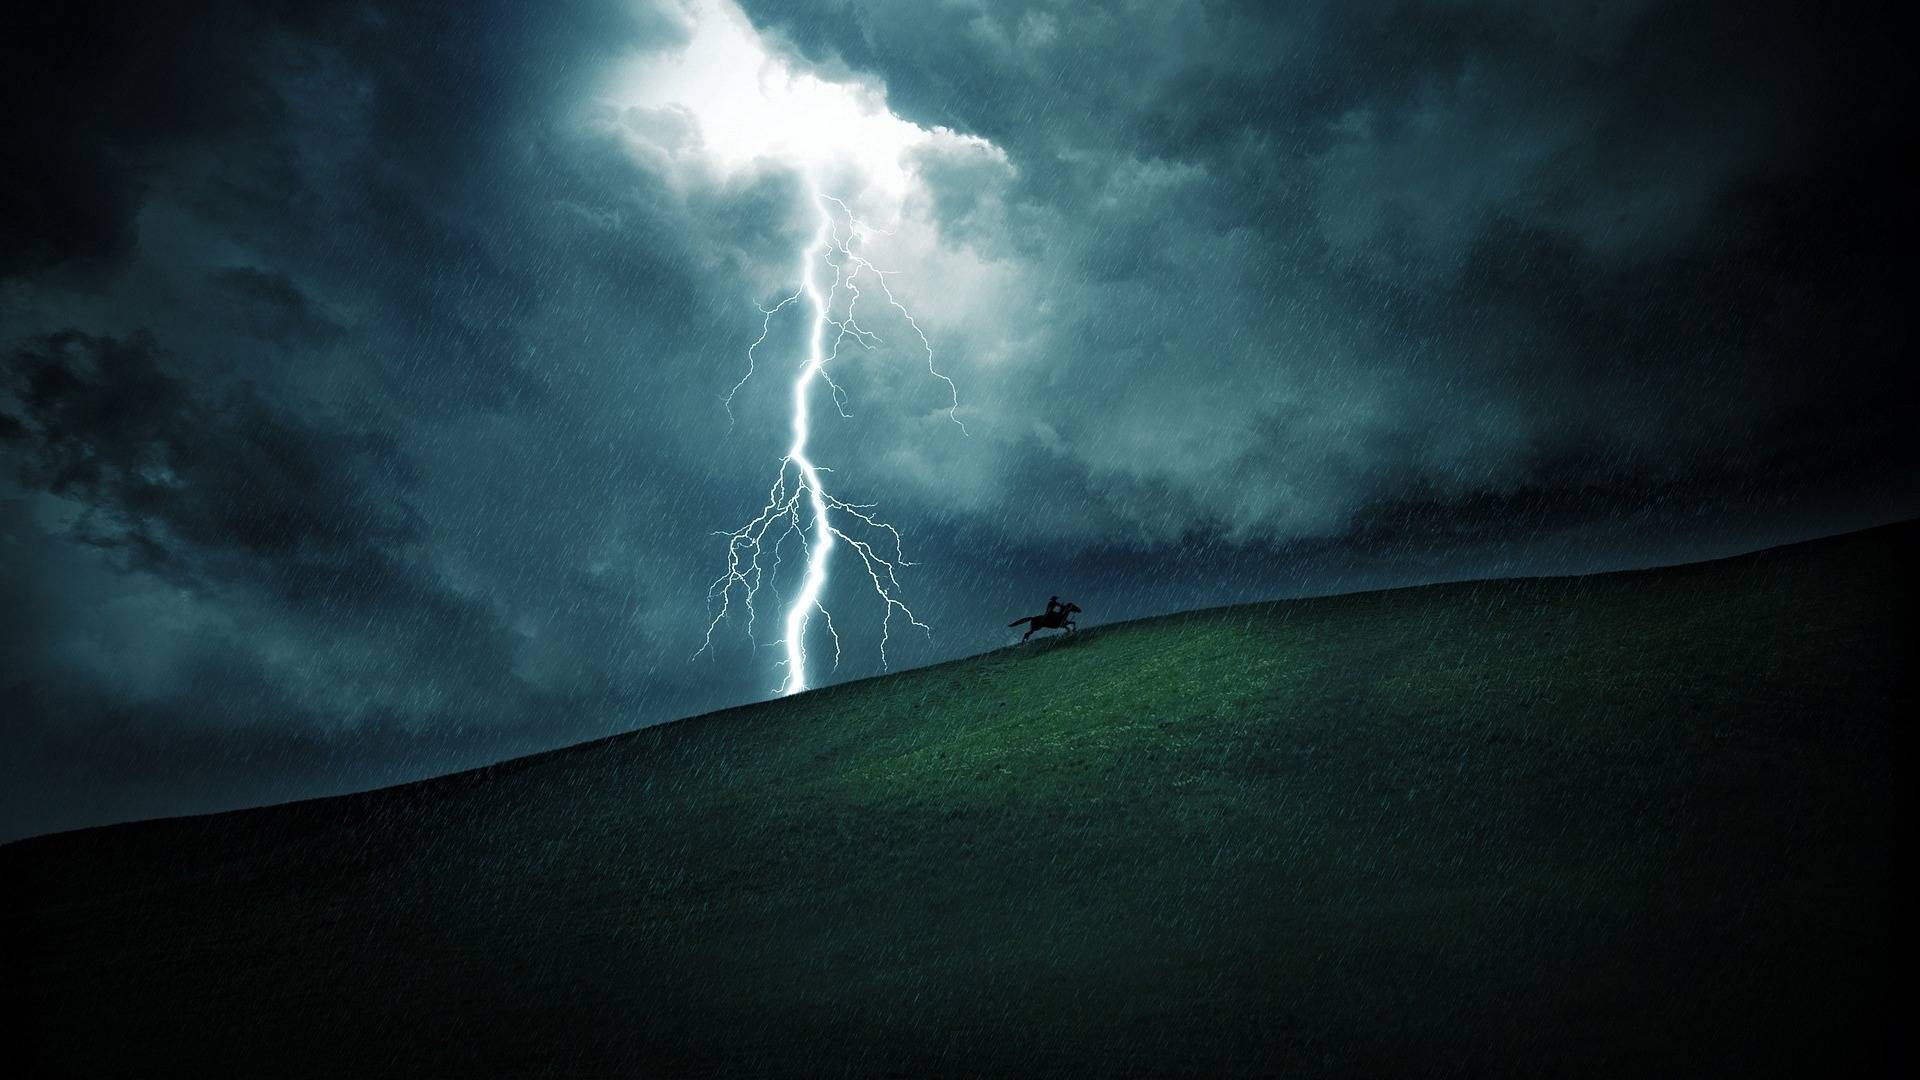 Thunderstorm Wallpaper Android Application